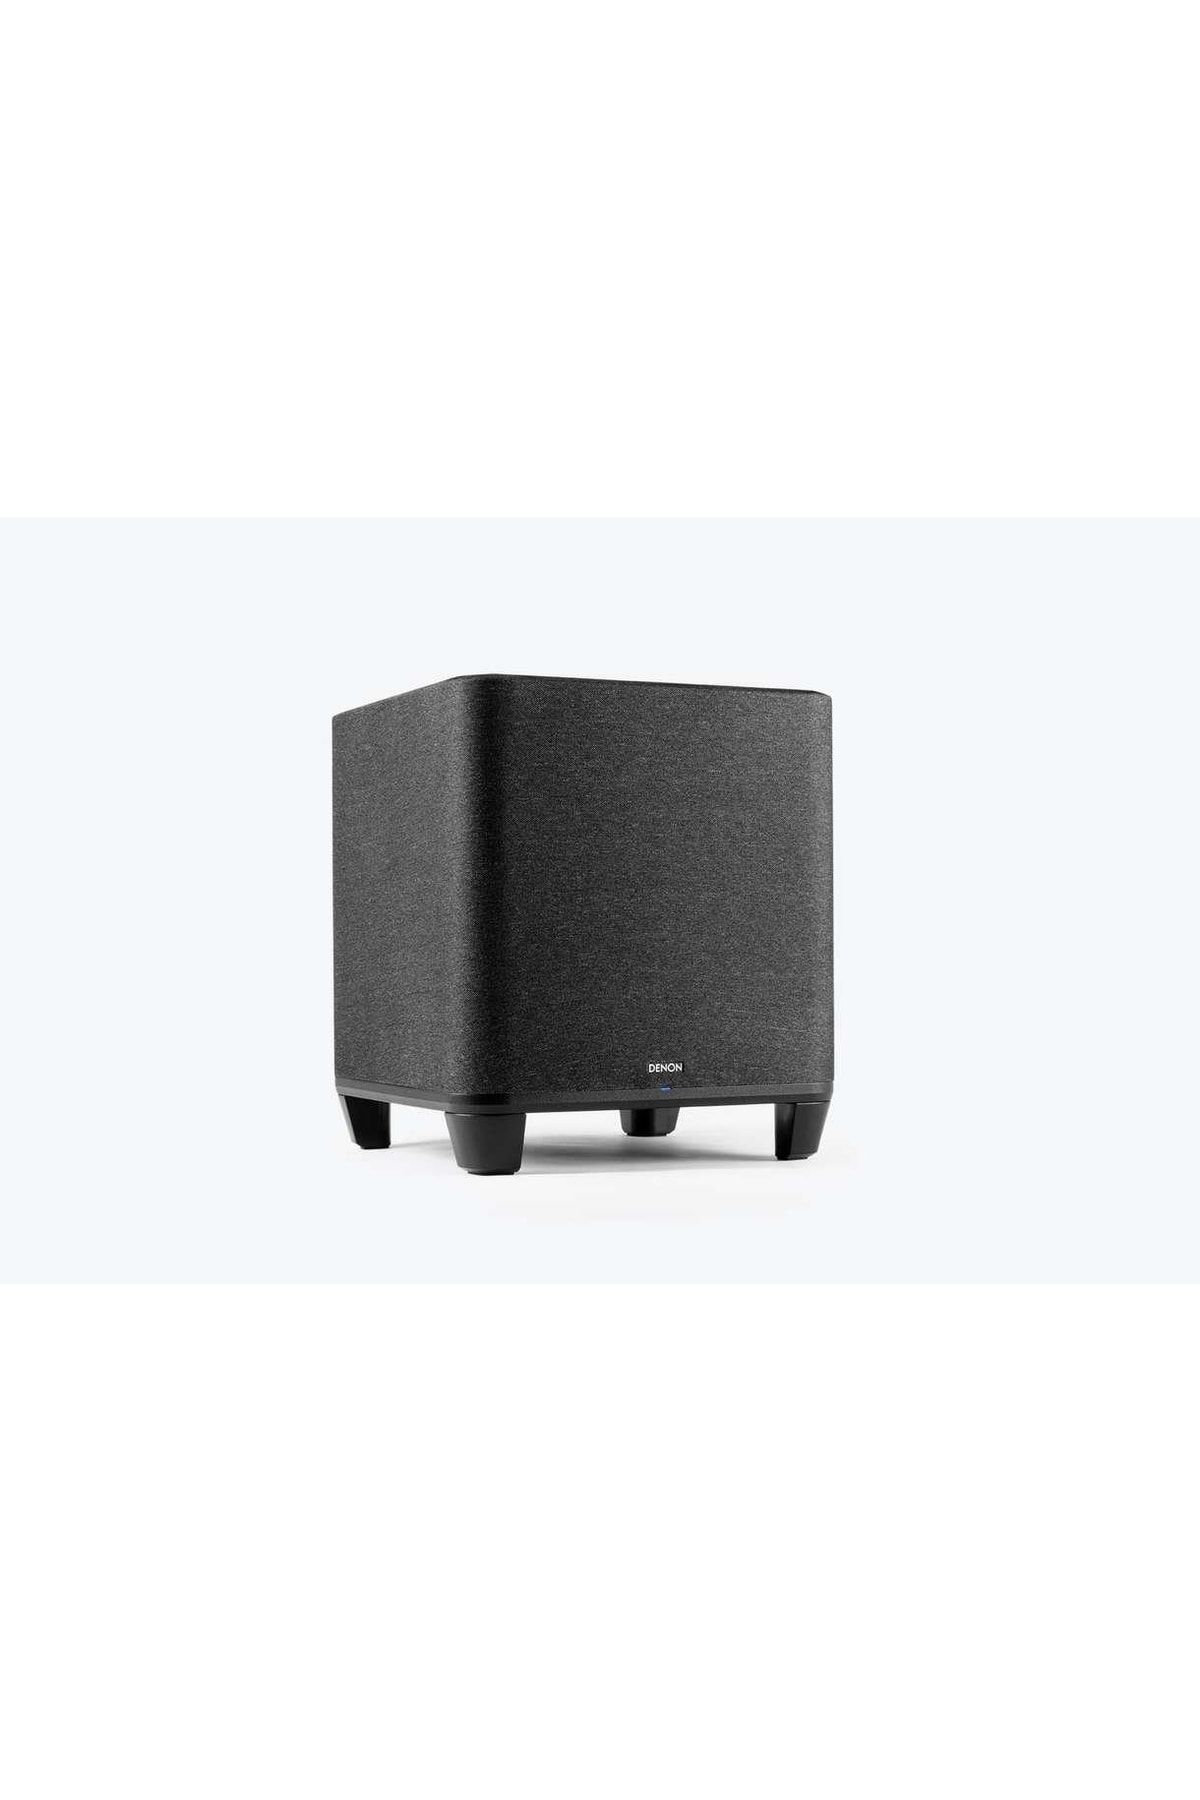 Denon Home Subwoofer With Heos Built-in